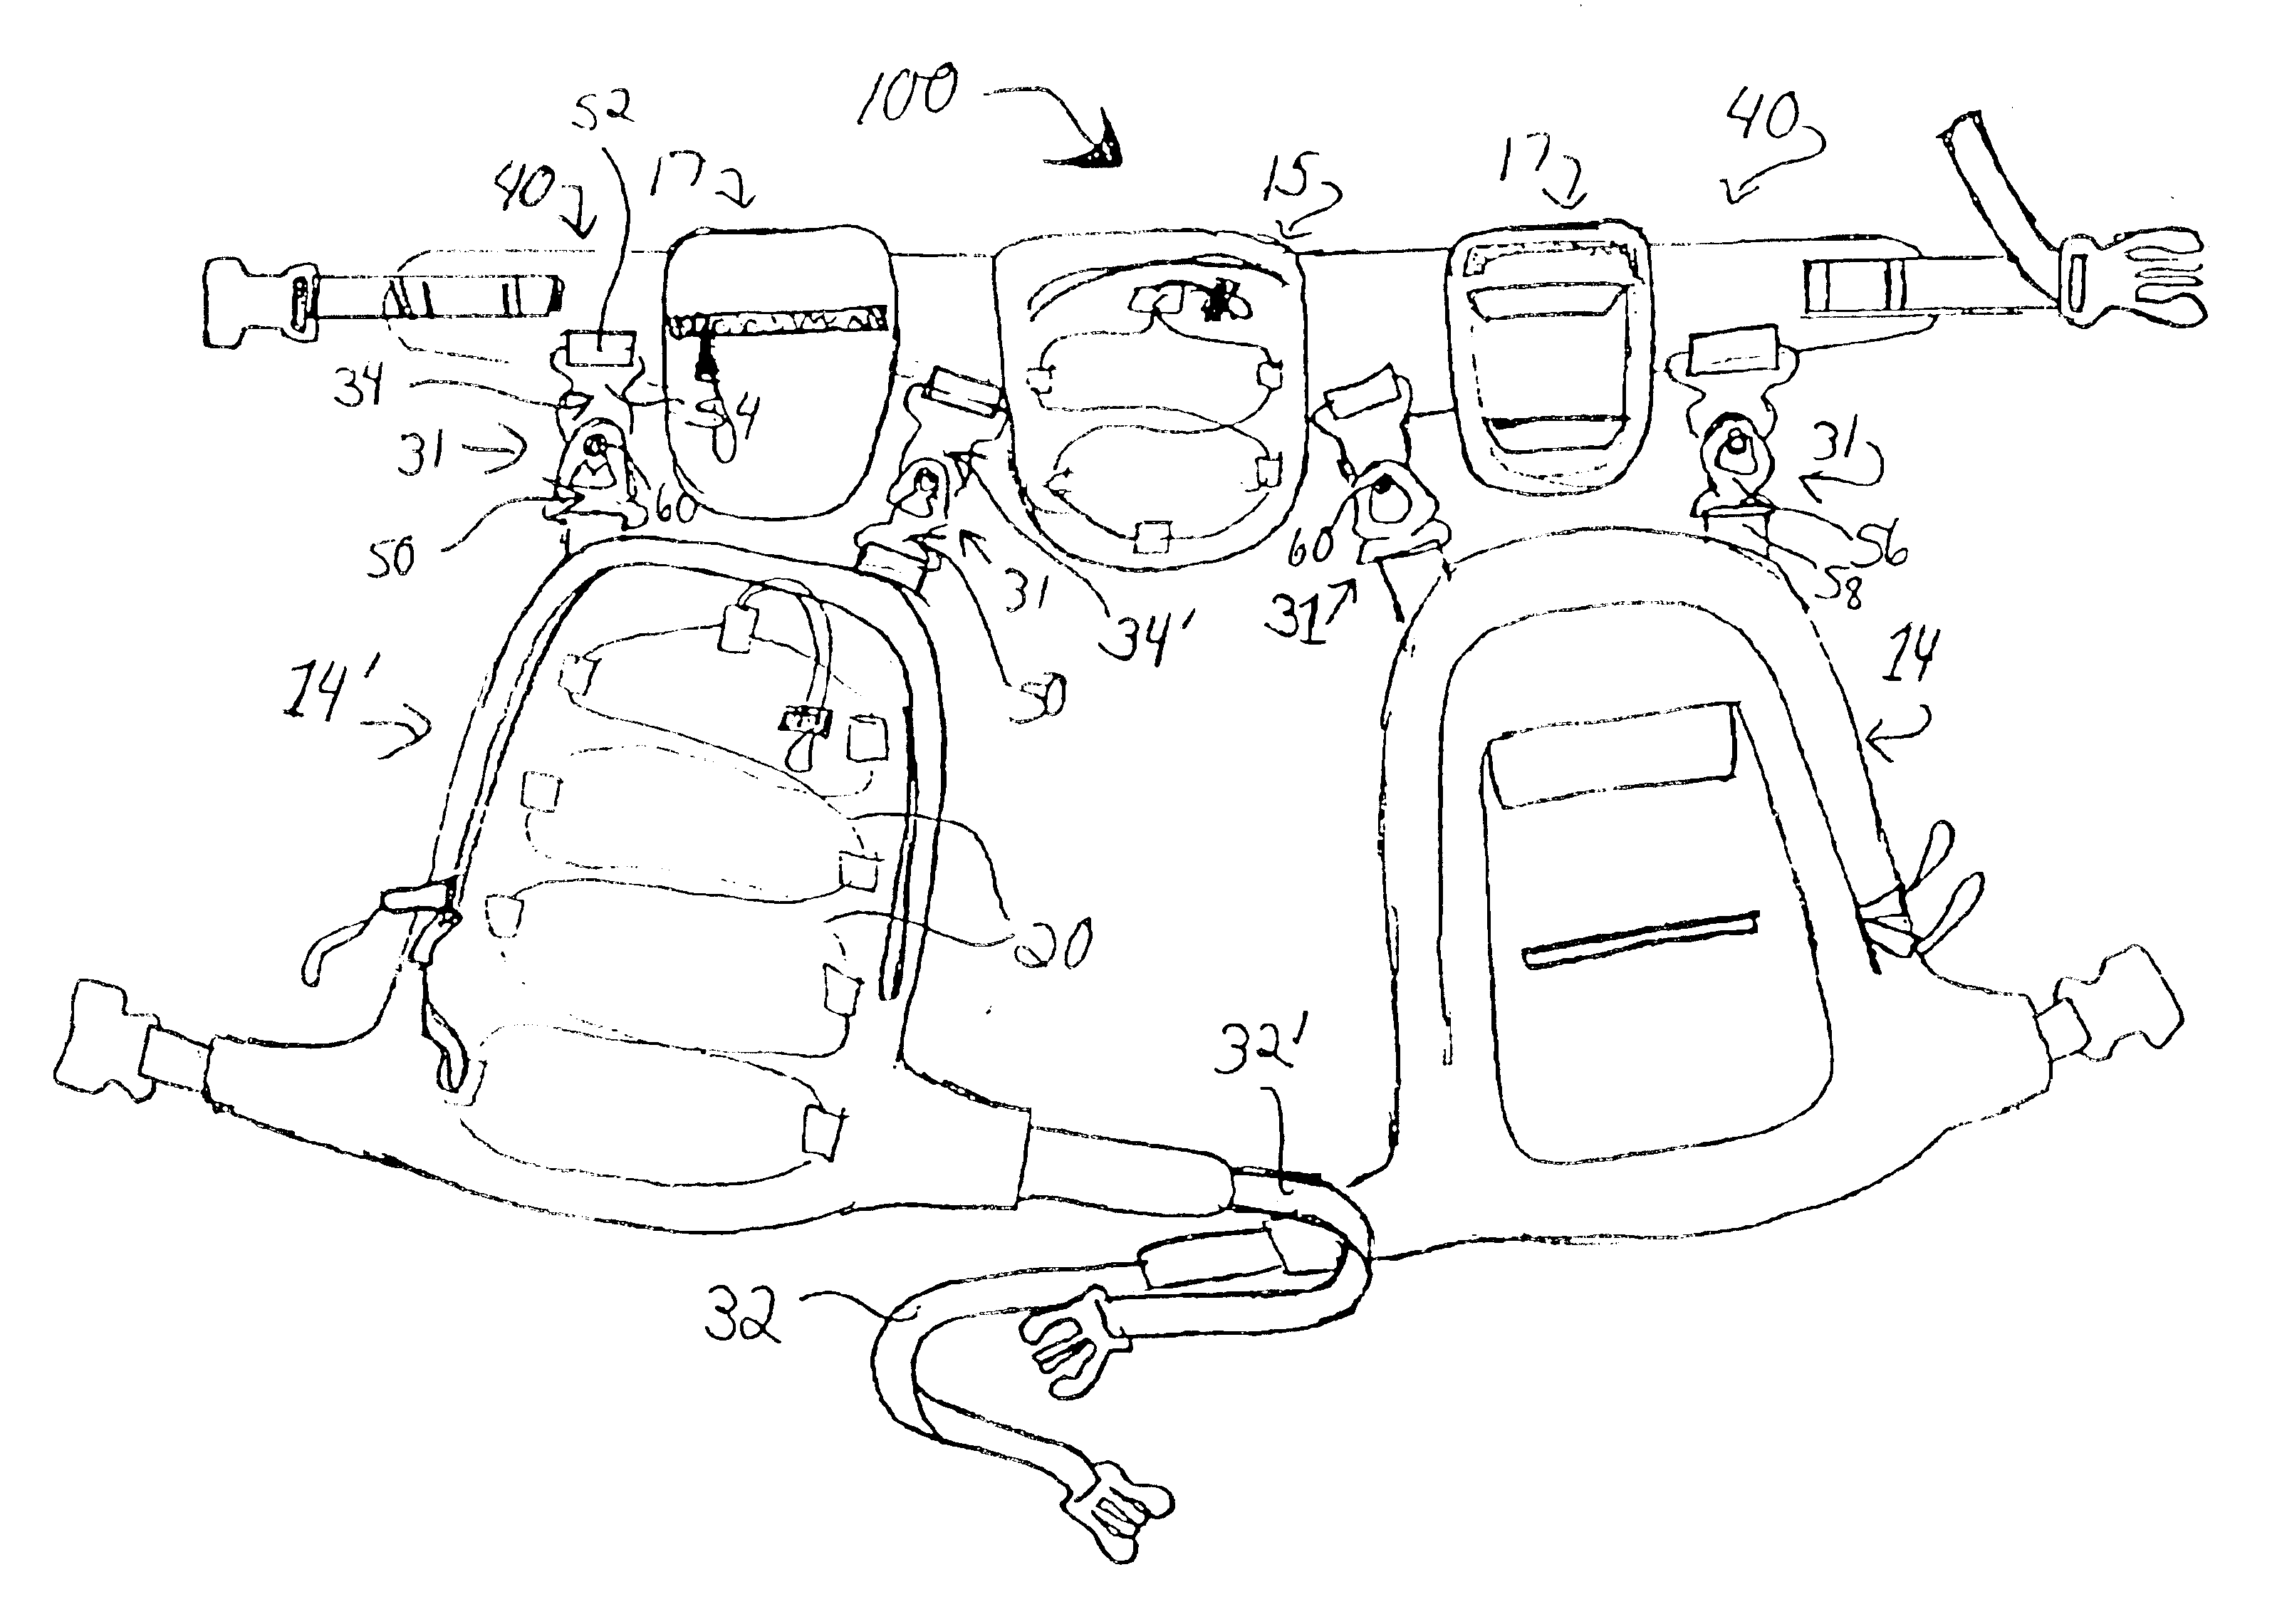 Modular pack system with belt and leg bags